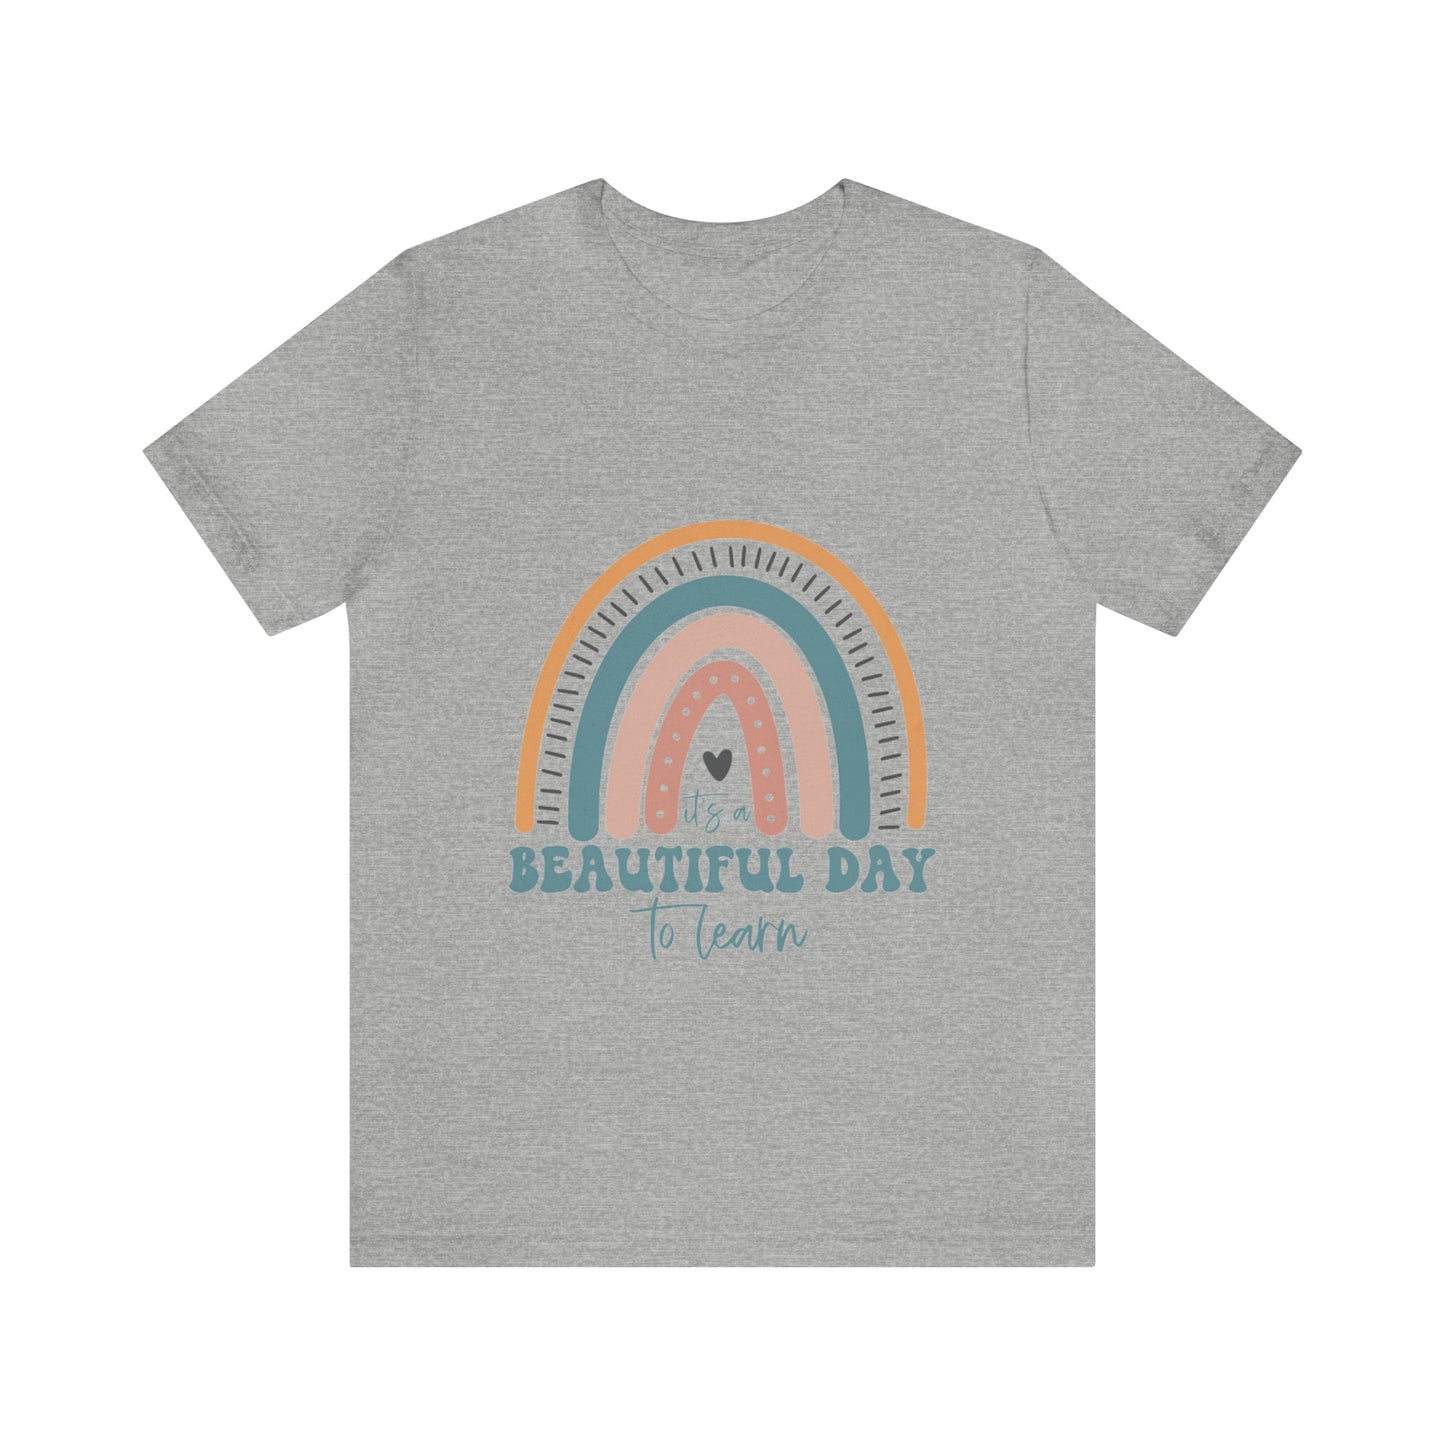 Retro rainbow "It's a beautiful day to learn" Unisex Tee